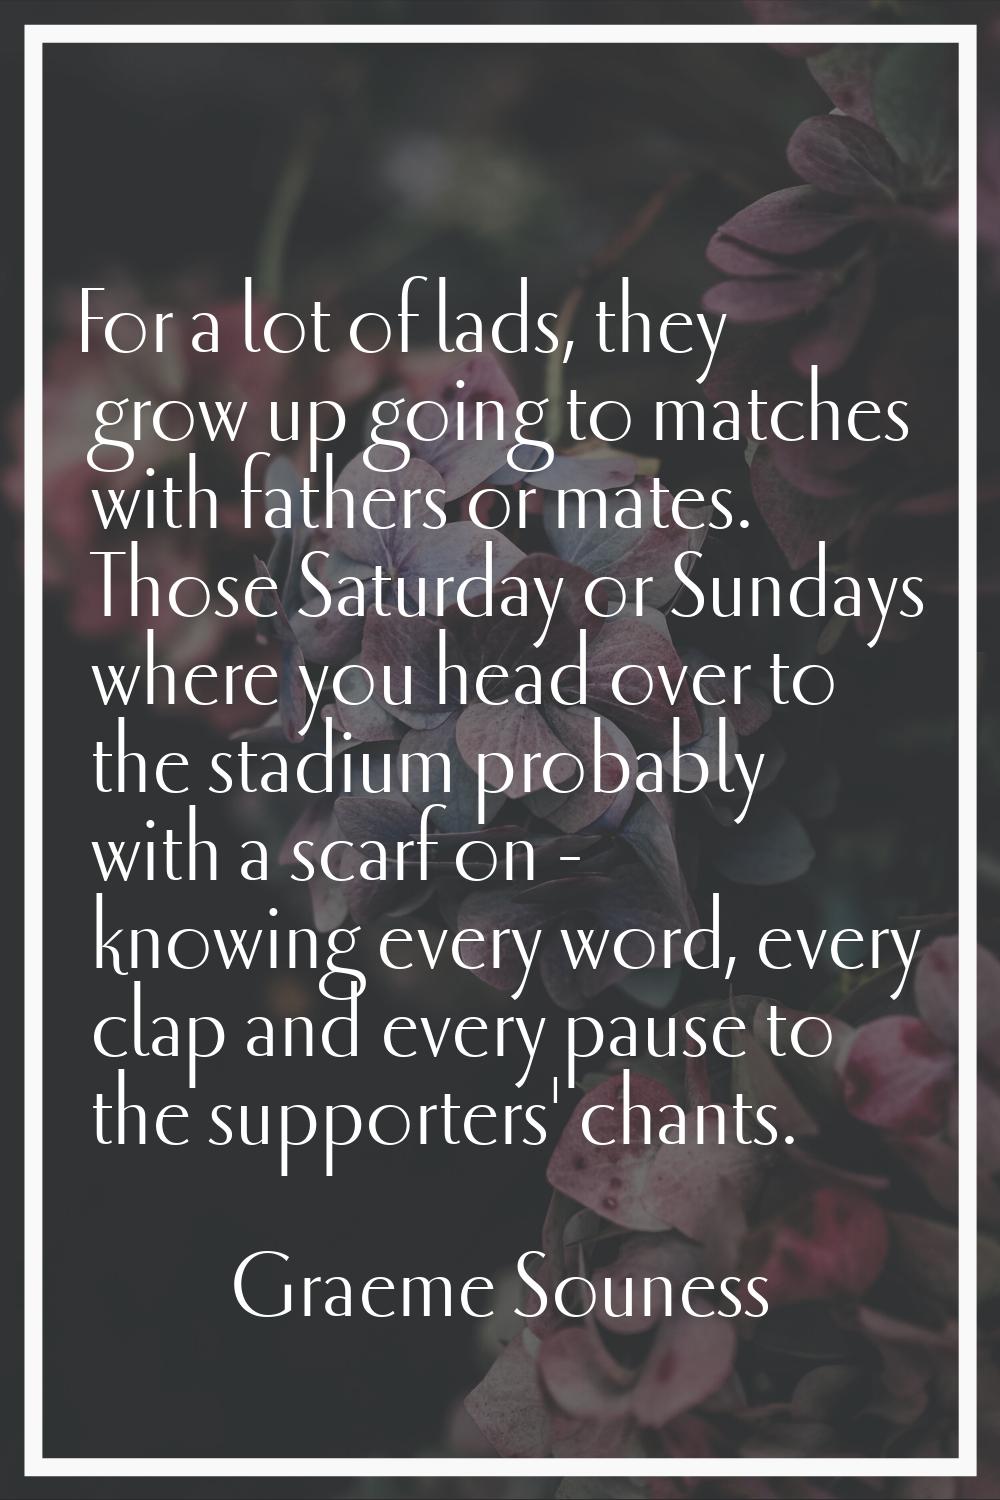 For a lot of lads, they grow up going to matches with fathers or mates. Those Saturday or Sundays w